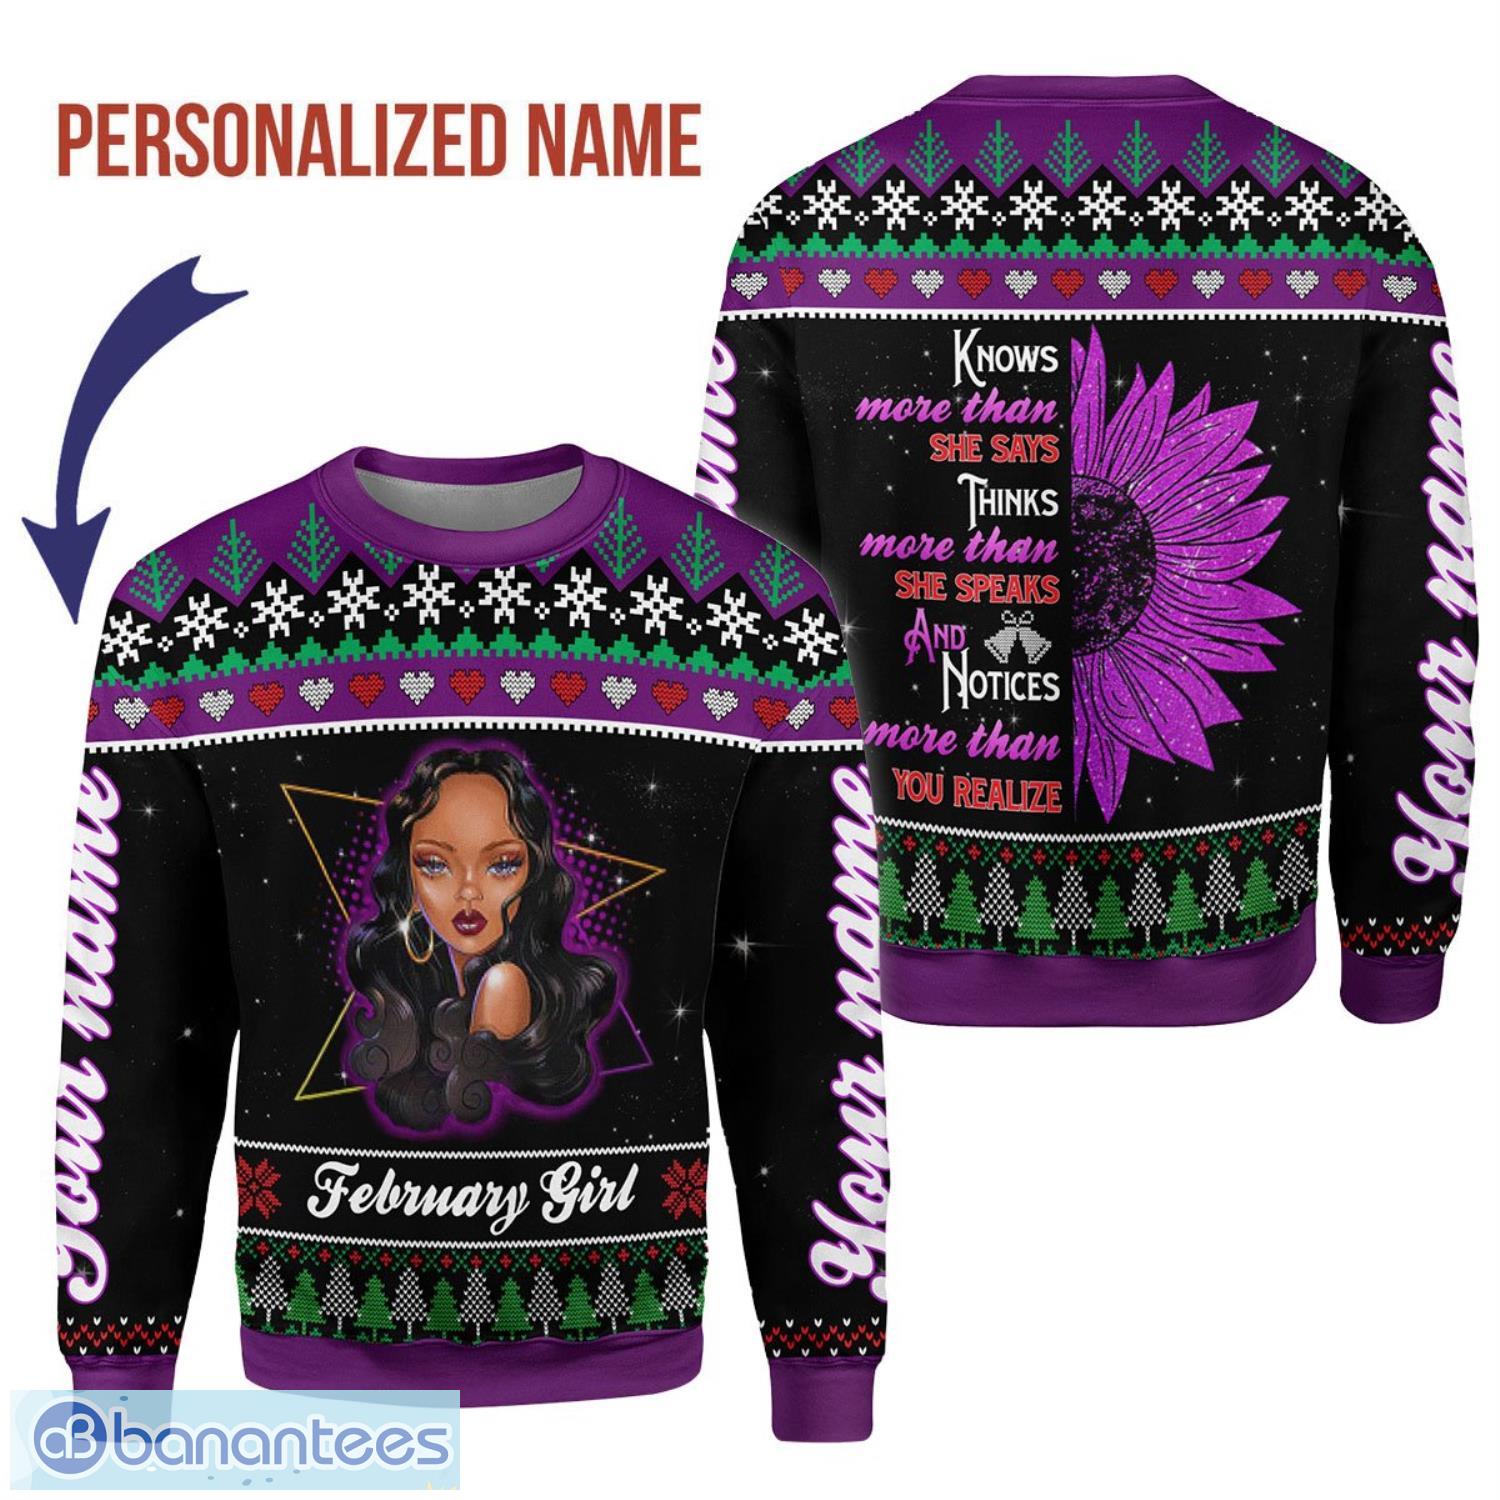 Personalized Name February Girl Knows More Than She Says 3D Ugly Christmas Sweater Christmas Gift Product Photo 1